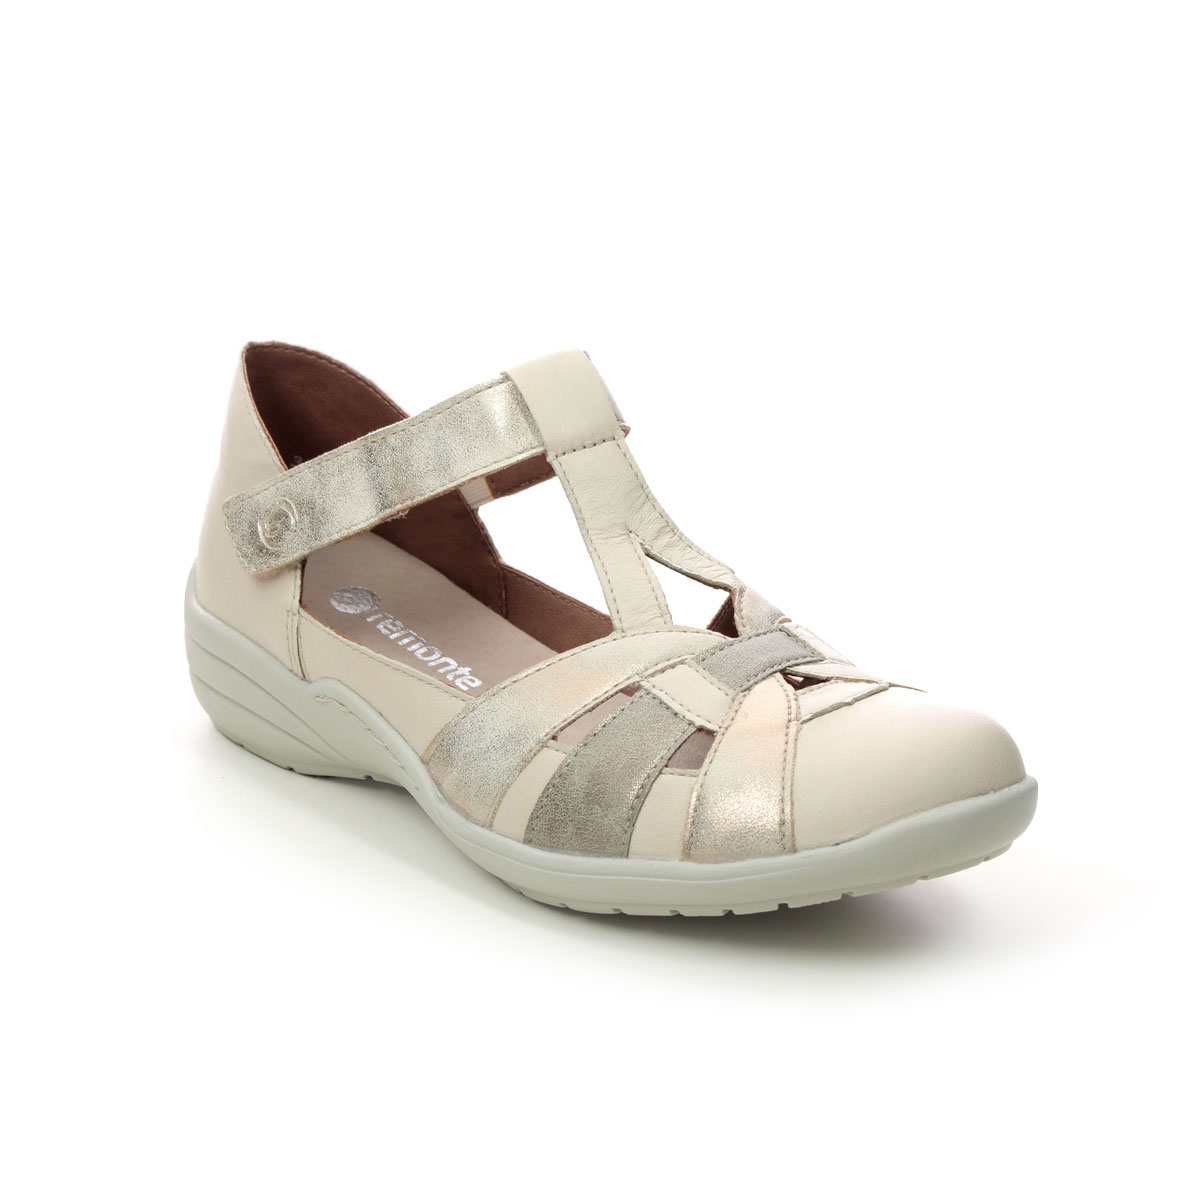 Remonte Bertavall Beige Leather Womens Closed Toe Sandals R7601-80 In Size 38 In Plain Beige Leather